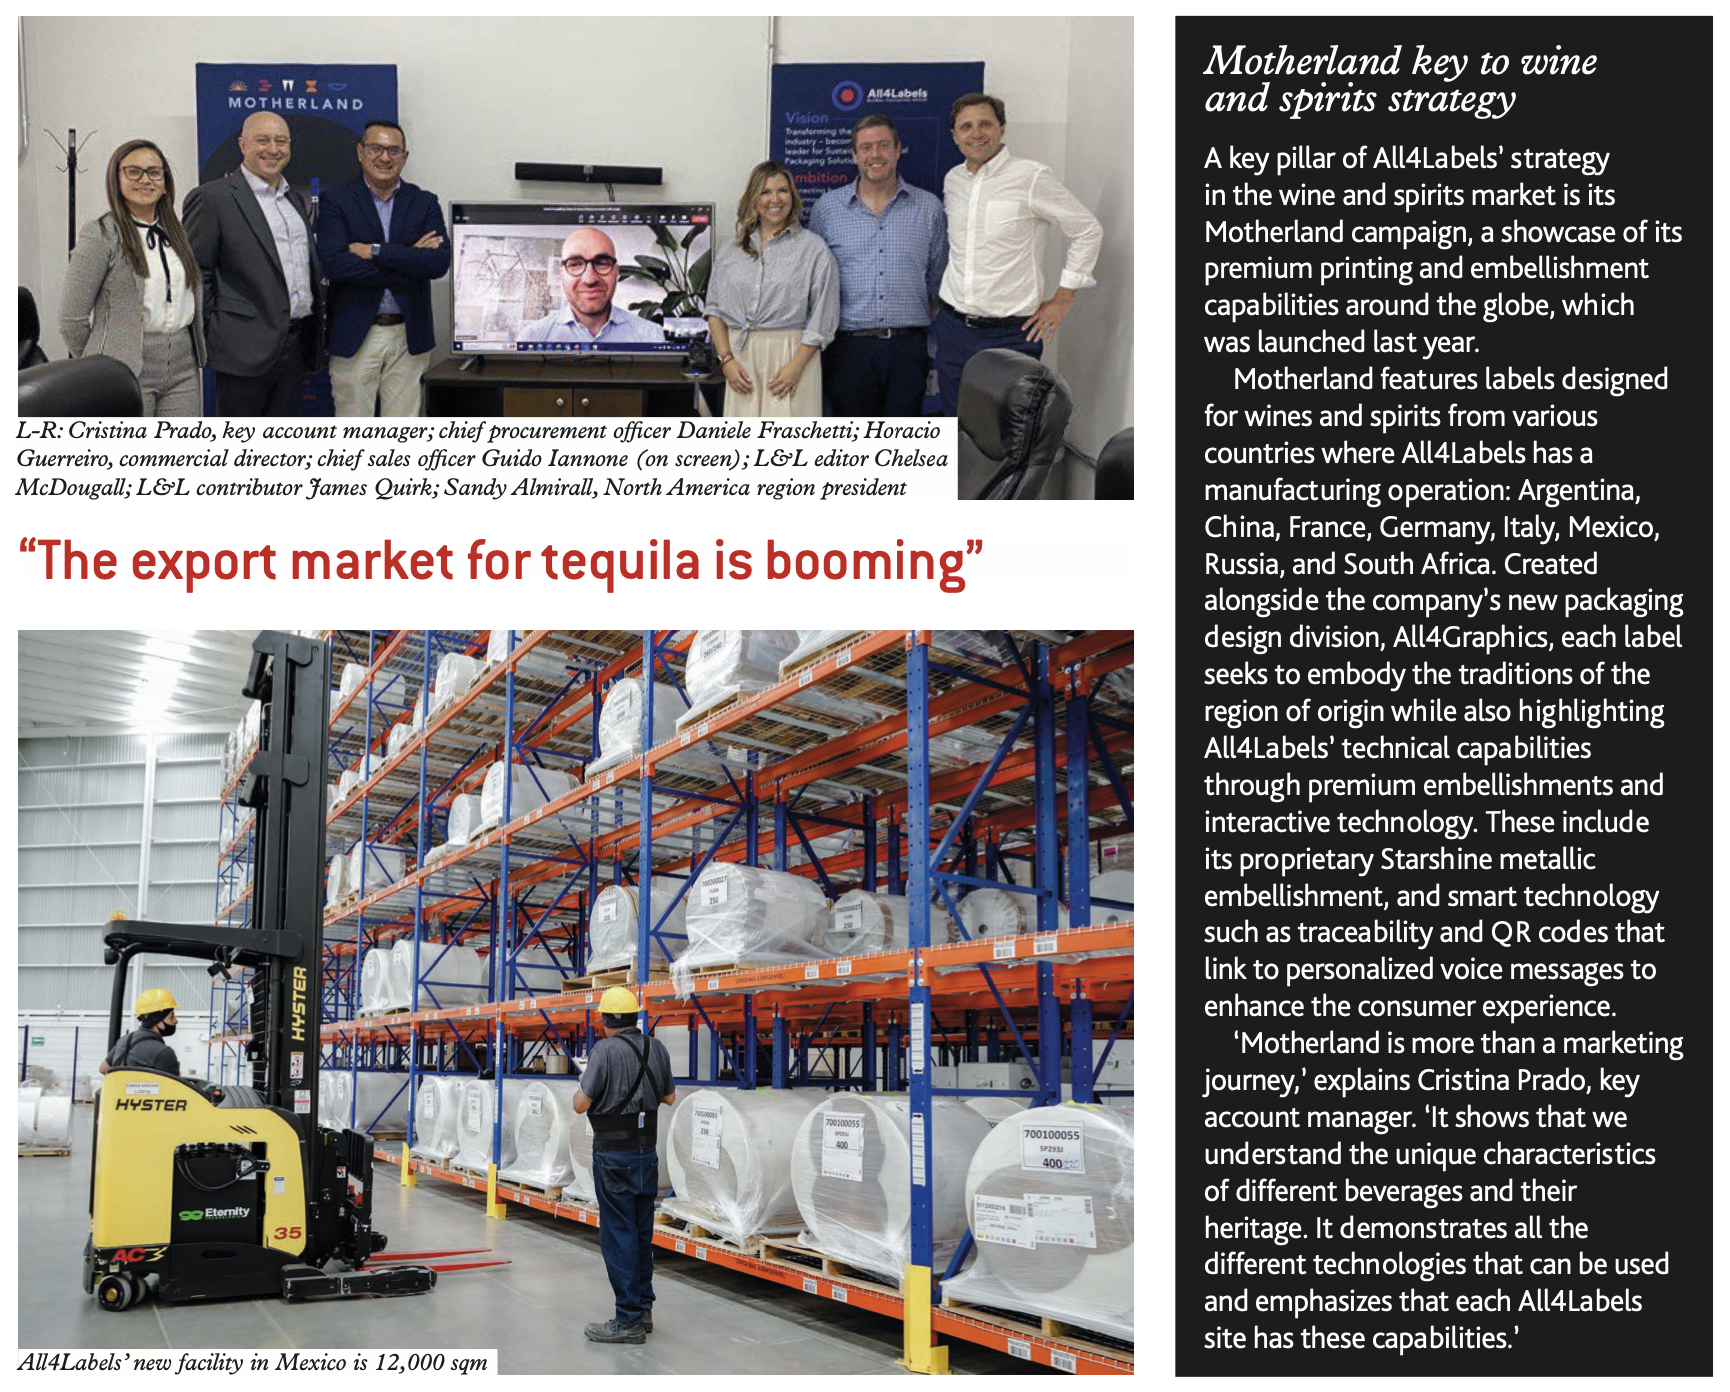 “The export market for tequila is booming”